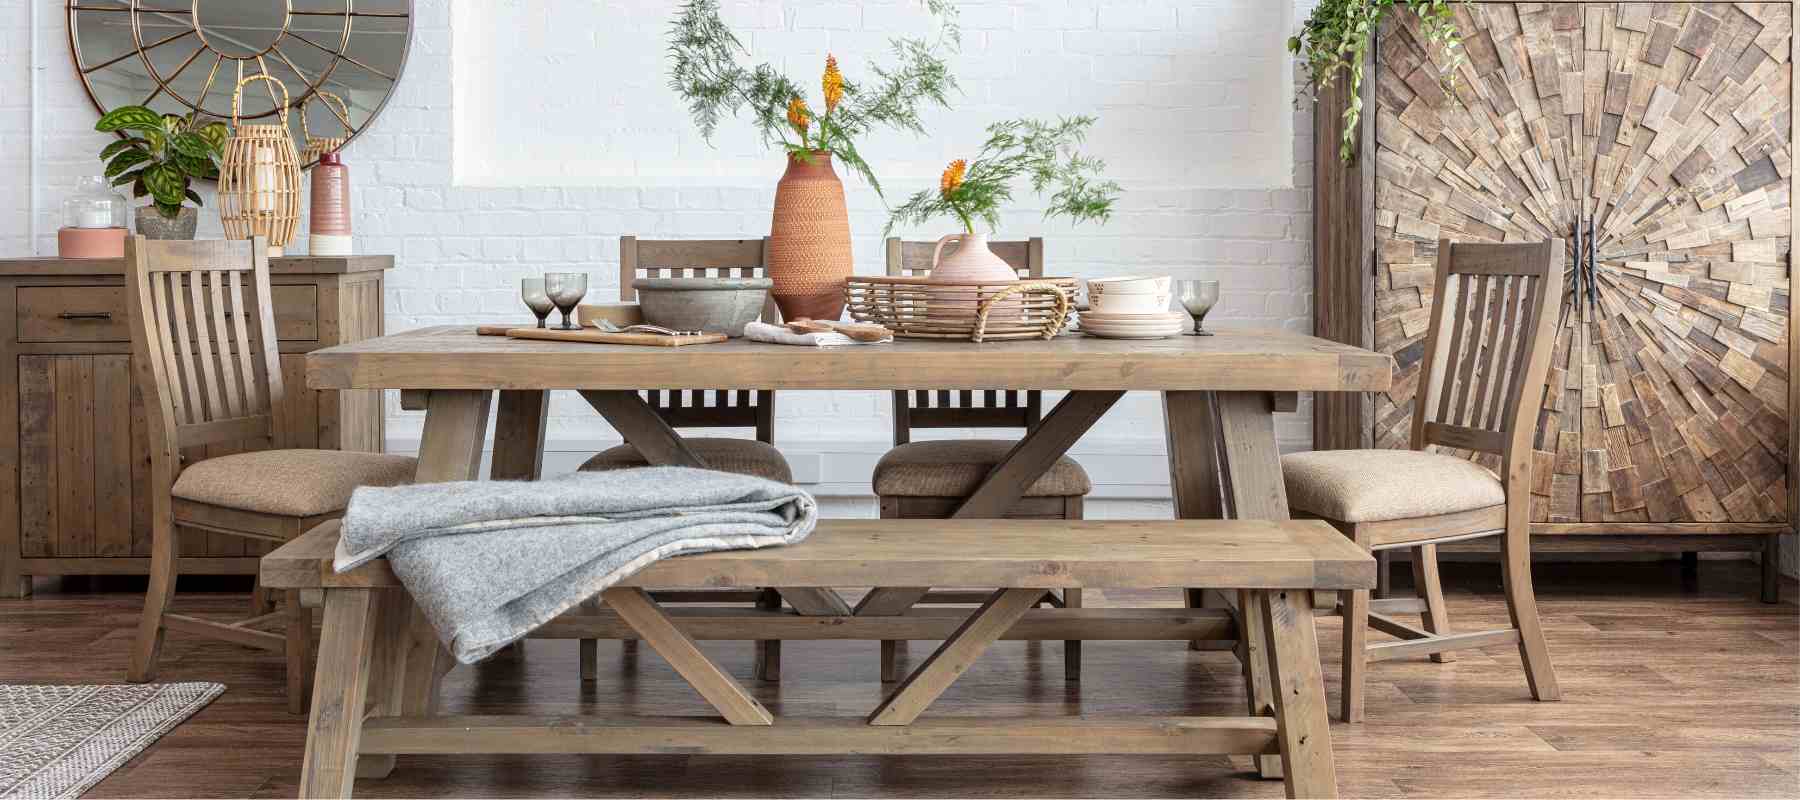 Farringdon Reclaimed Wood Trestle Table with dining bench 